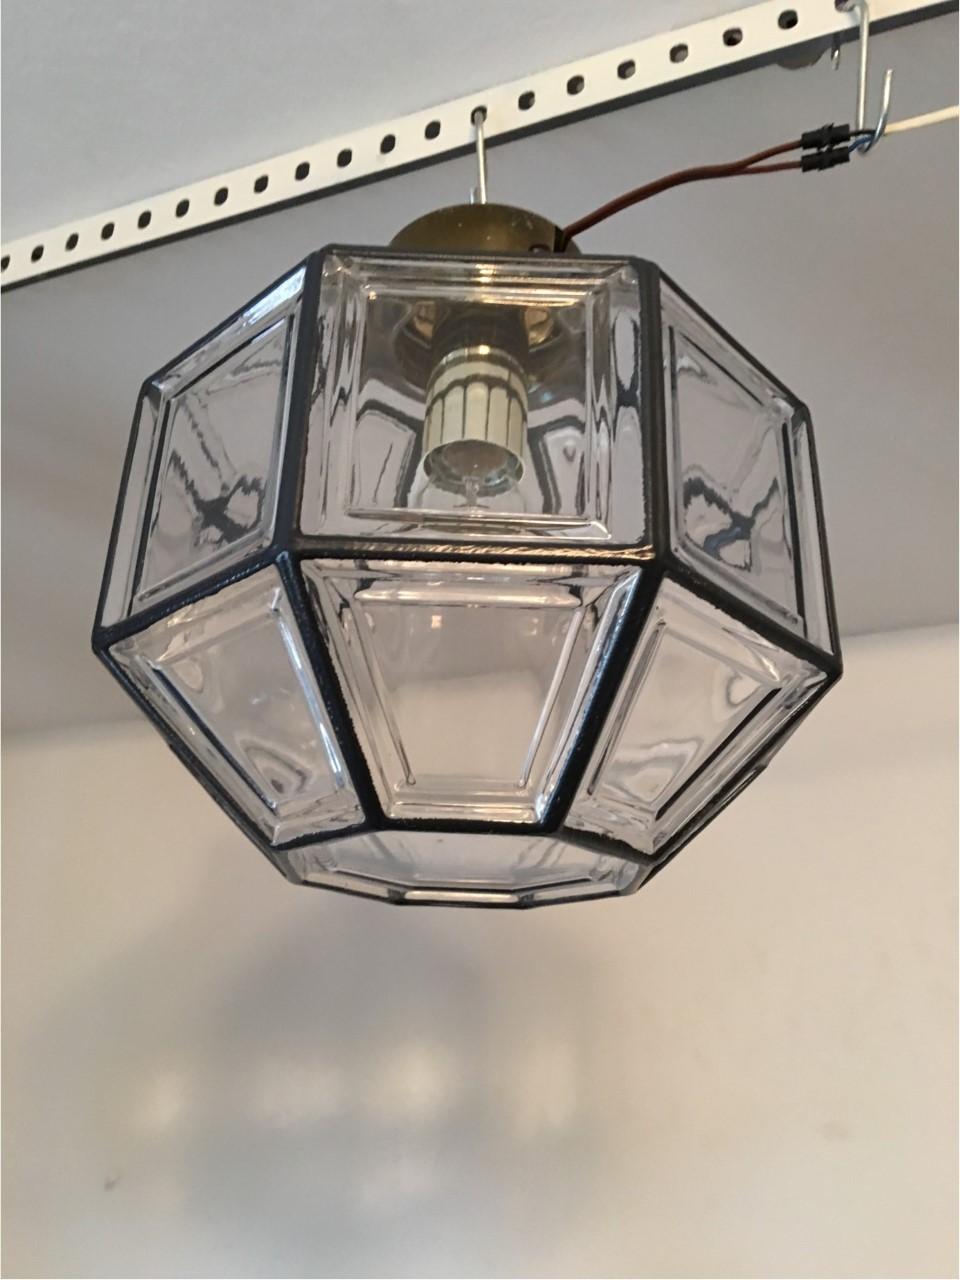 A ceiling lamp Flush Mount with black stripes from Limburg of Germany. 1960s manufacturing date. Requires one European E 26 / 27 Edison Bulb up to 75 Watts for a spectacular lighting effect. Rewired to meet US Standards.